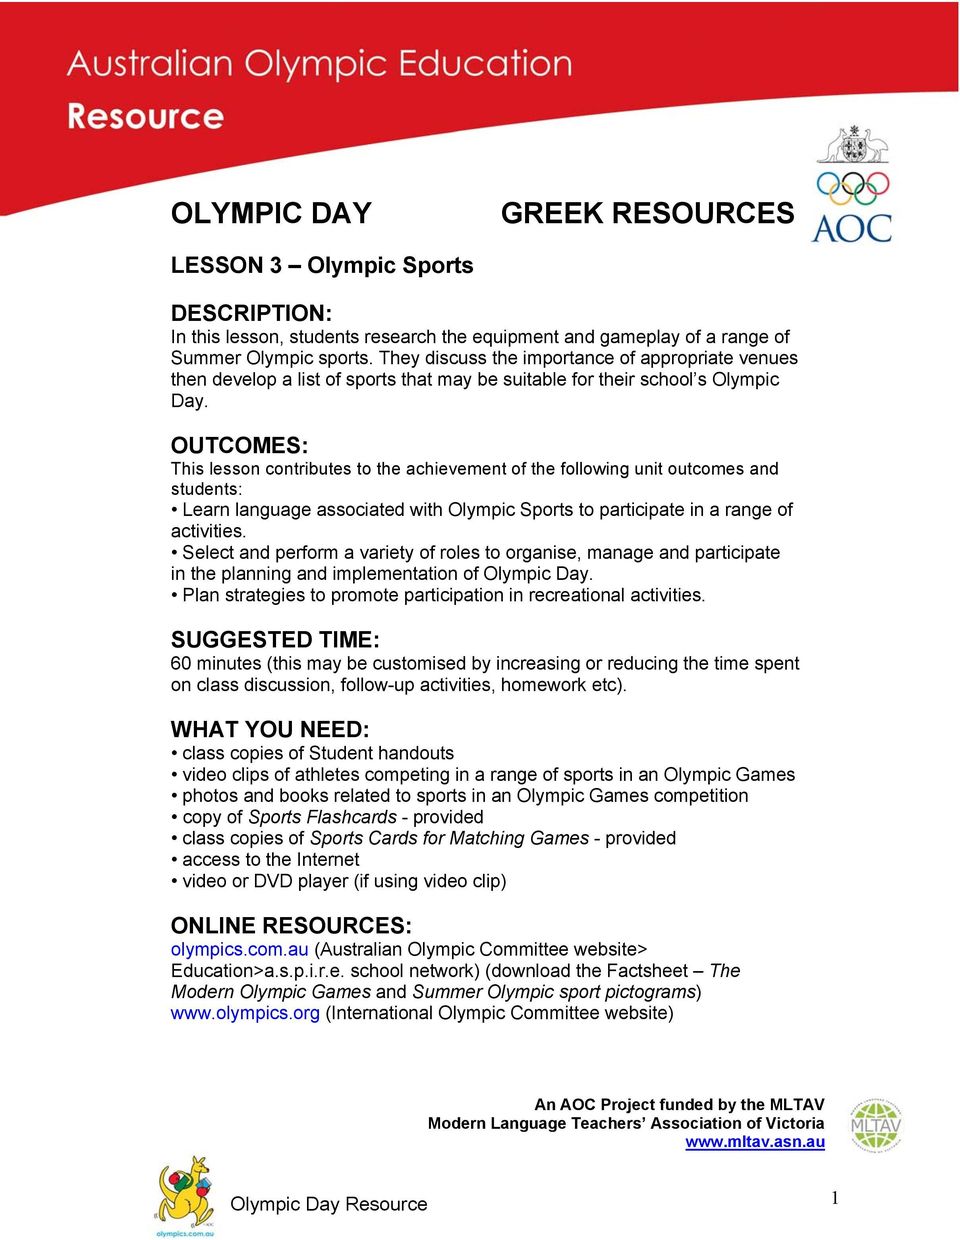 OUTCOMES: This lesson contributes to the achievement of the following unit outcomes and students: Learn language associated with Olympic Sports to participate in a range of activities.